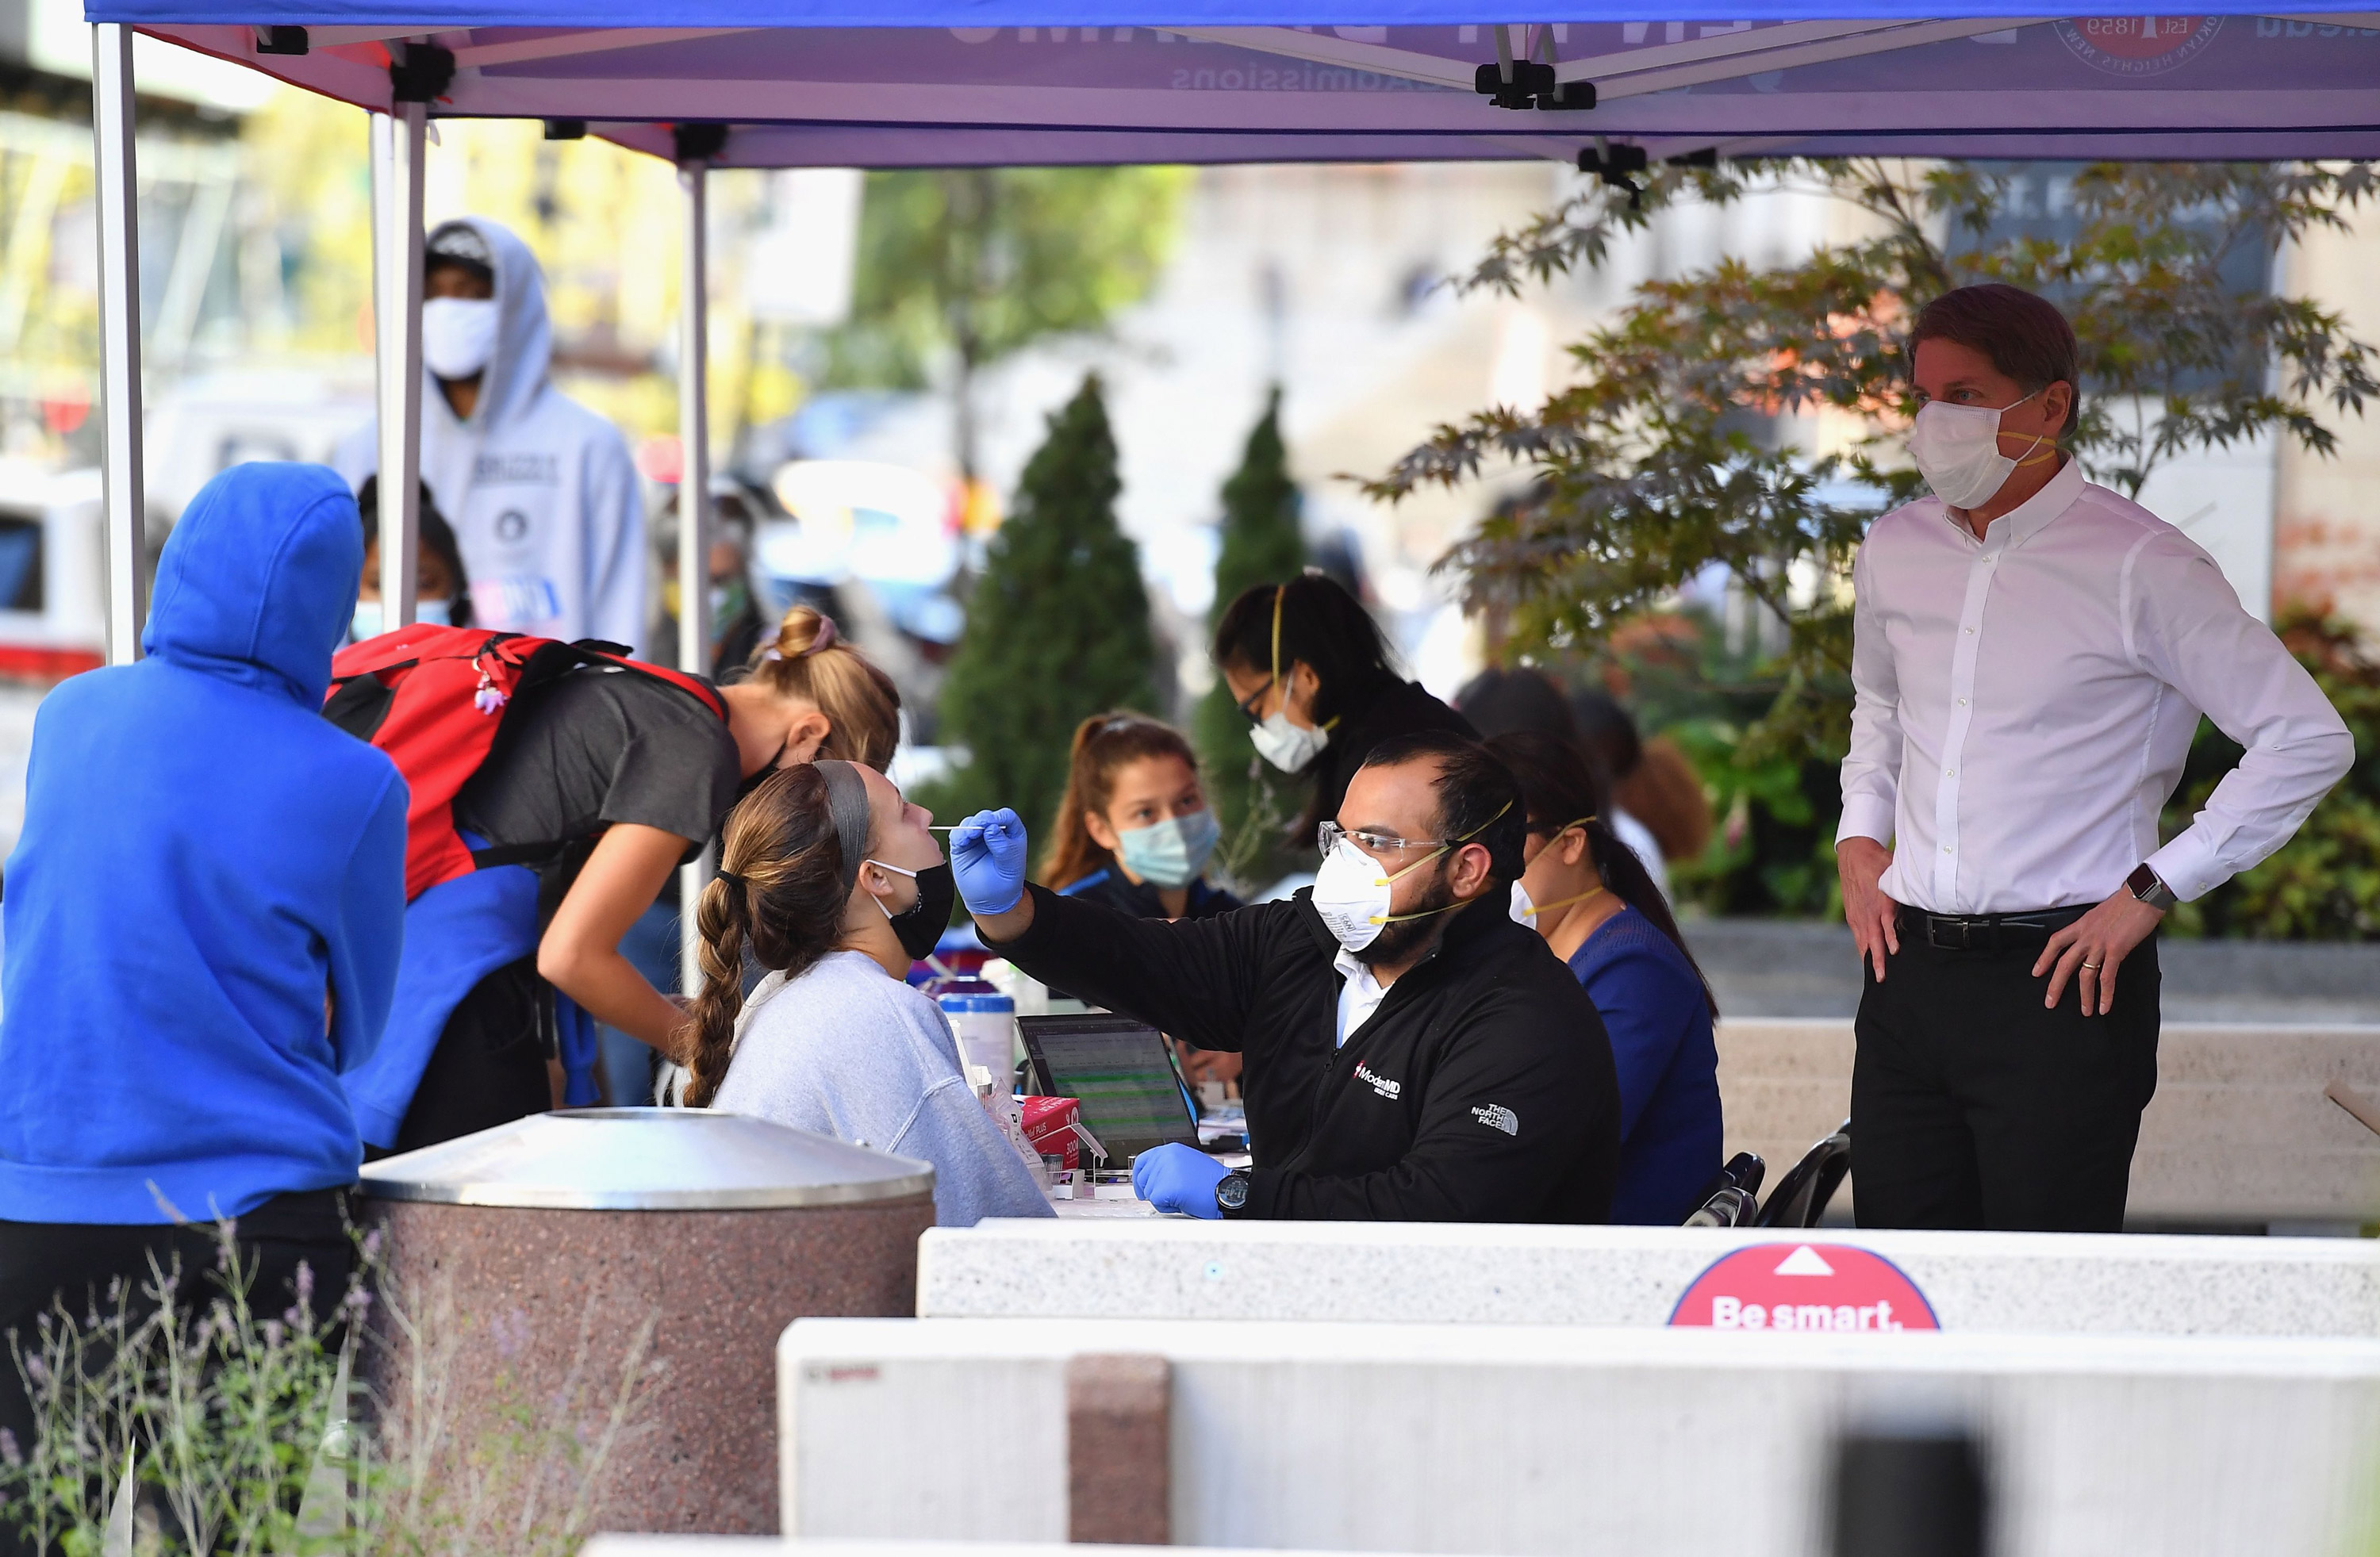 A medical worker takes a nasal swab sample to test for COVID-19 at the Brooklyn Health Medical Alliance urgent care pop up testing site on October 8 in New York City.